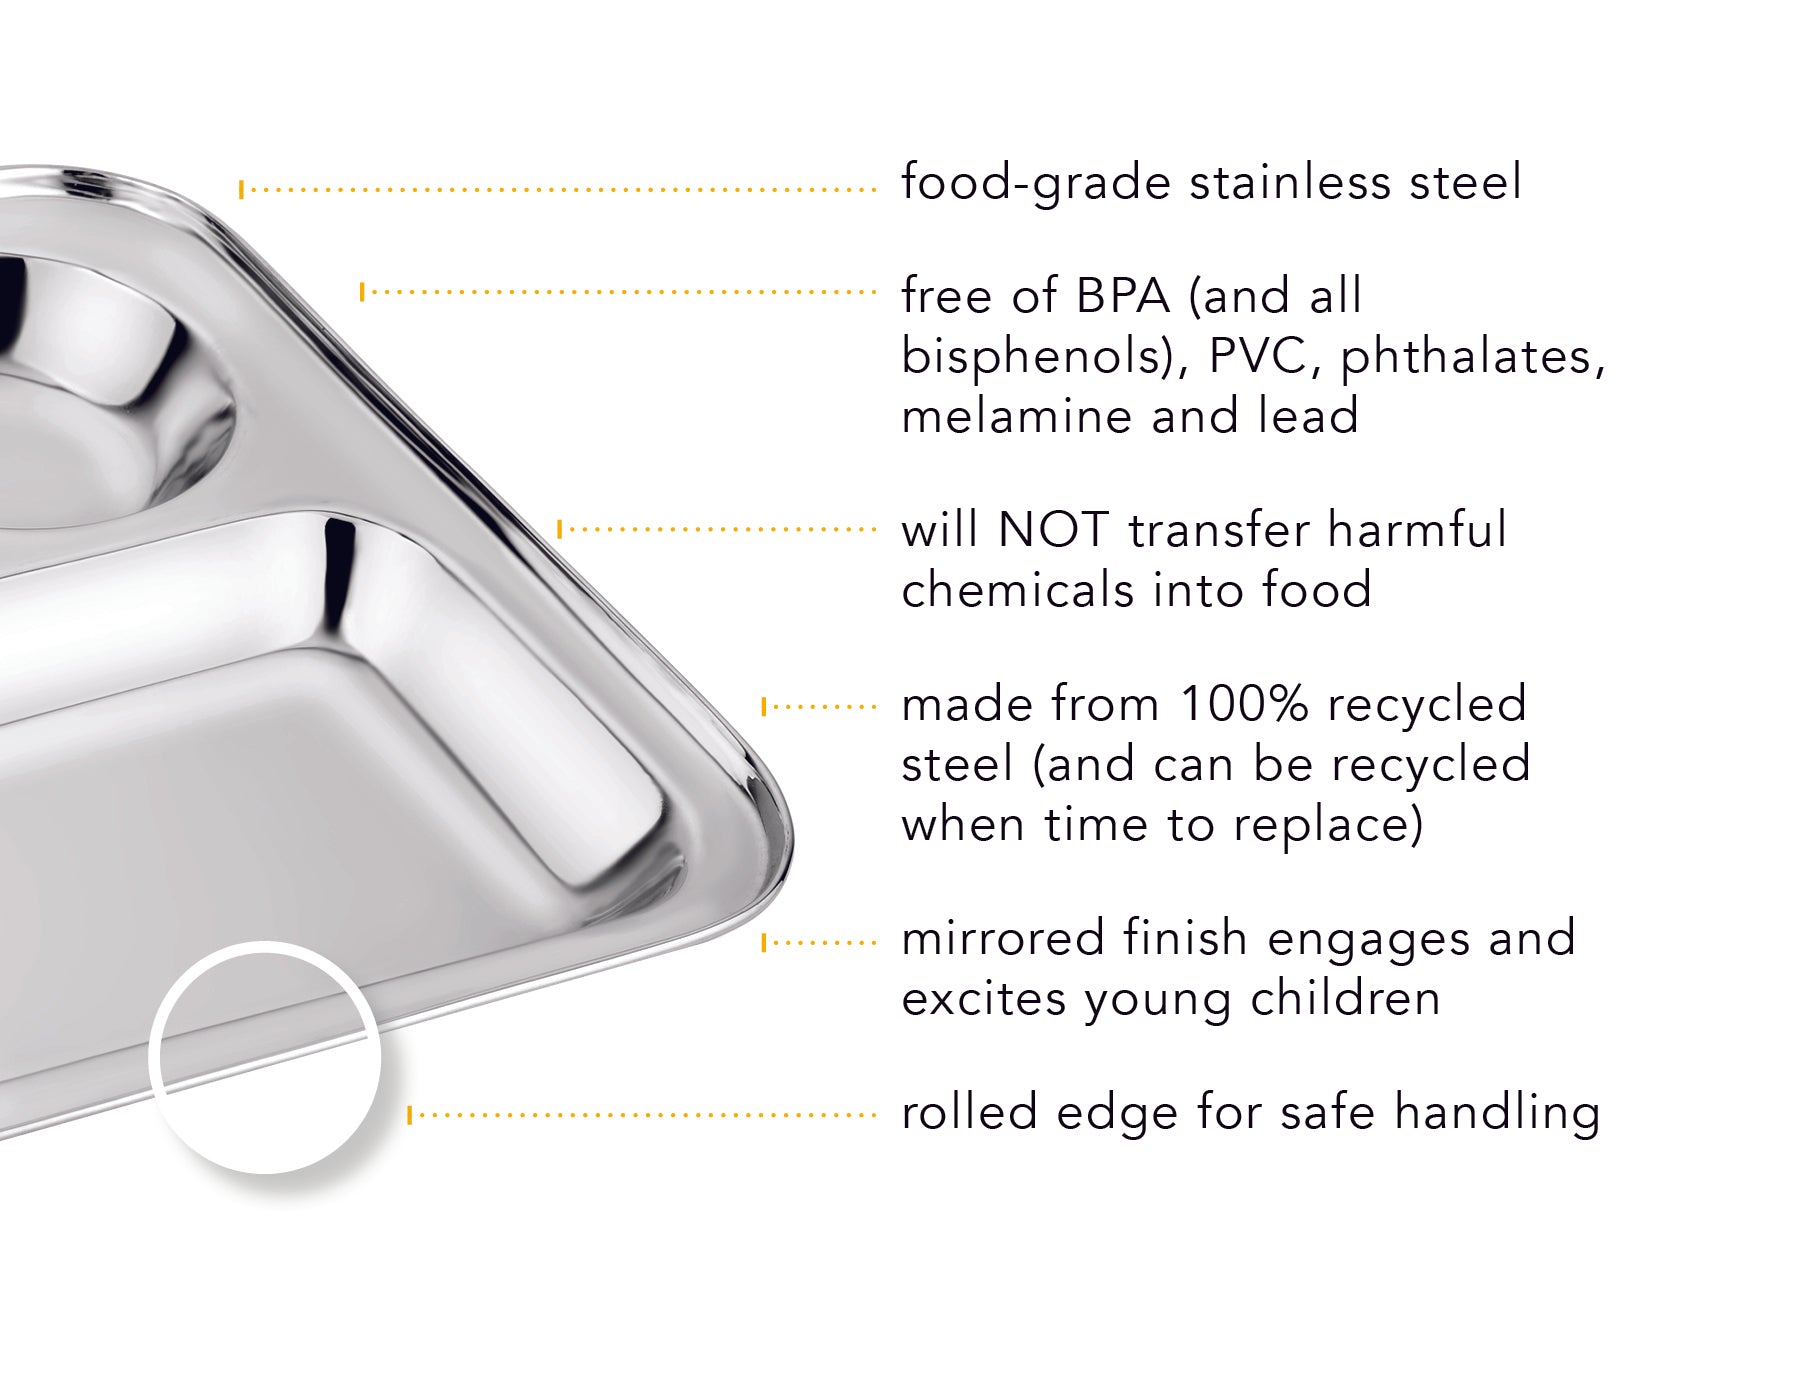 Our cafeteria trays are food-grade stainless steel, free of BPA (and all bisphenols), PVC, phthalates, melamine and lead, harmful chemicals will not transfer into food, made from 100% recycled steel, mirrored finish engages children, and the rolled edge